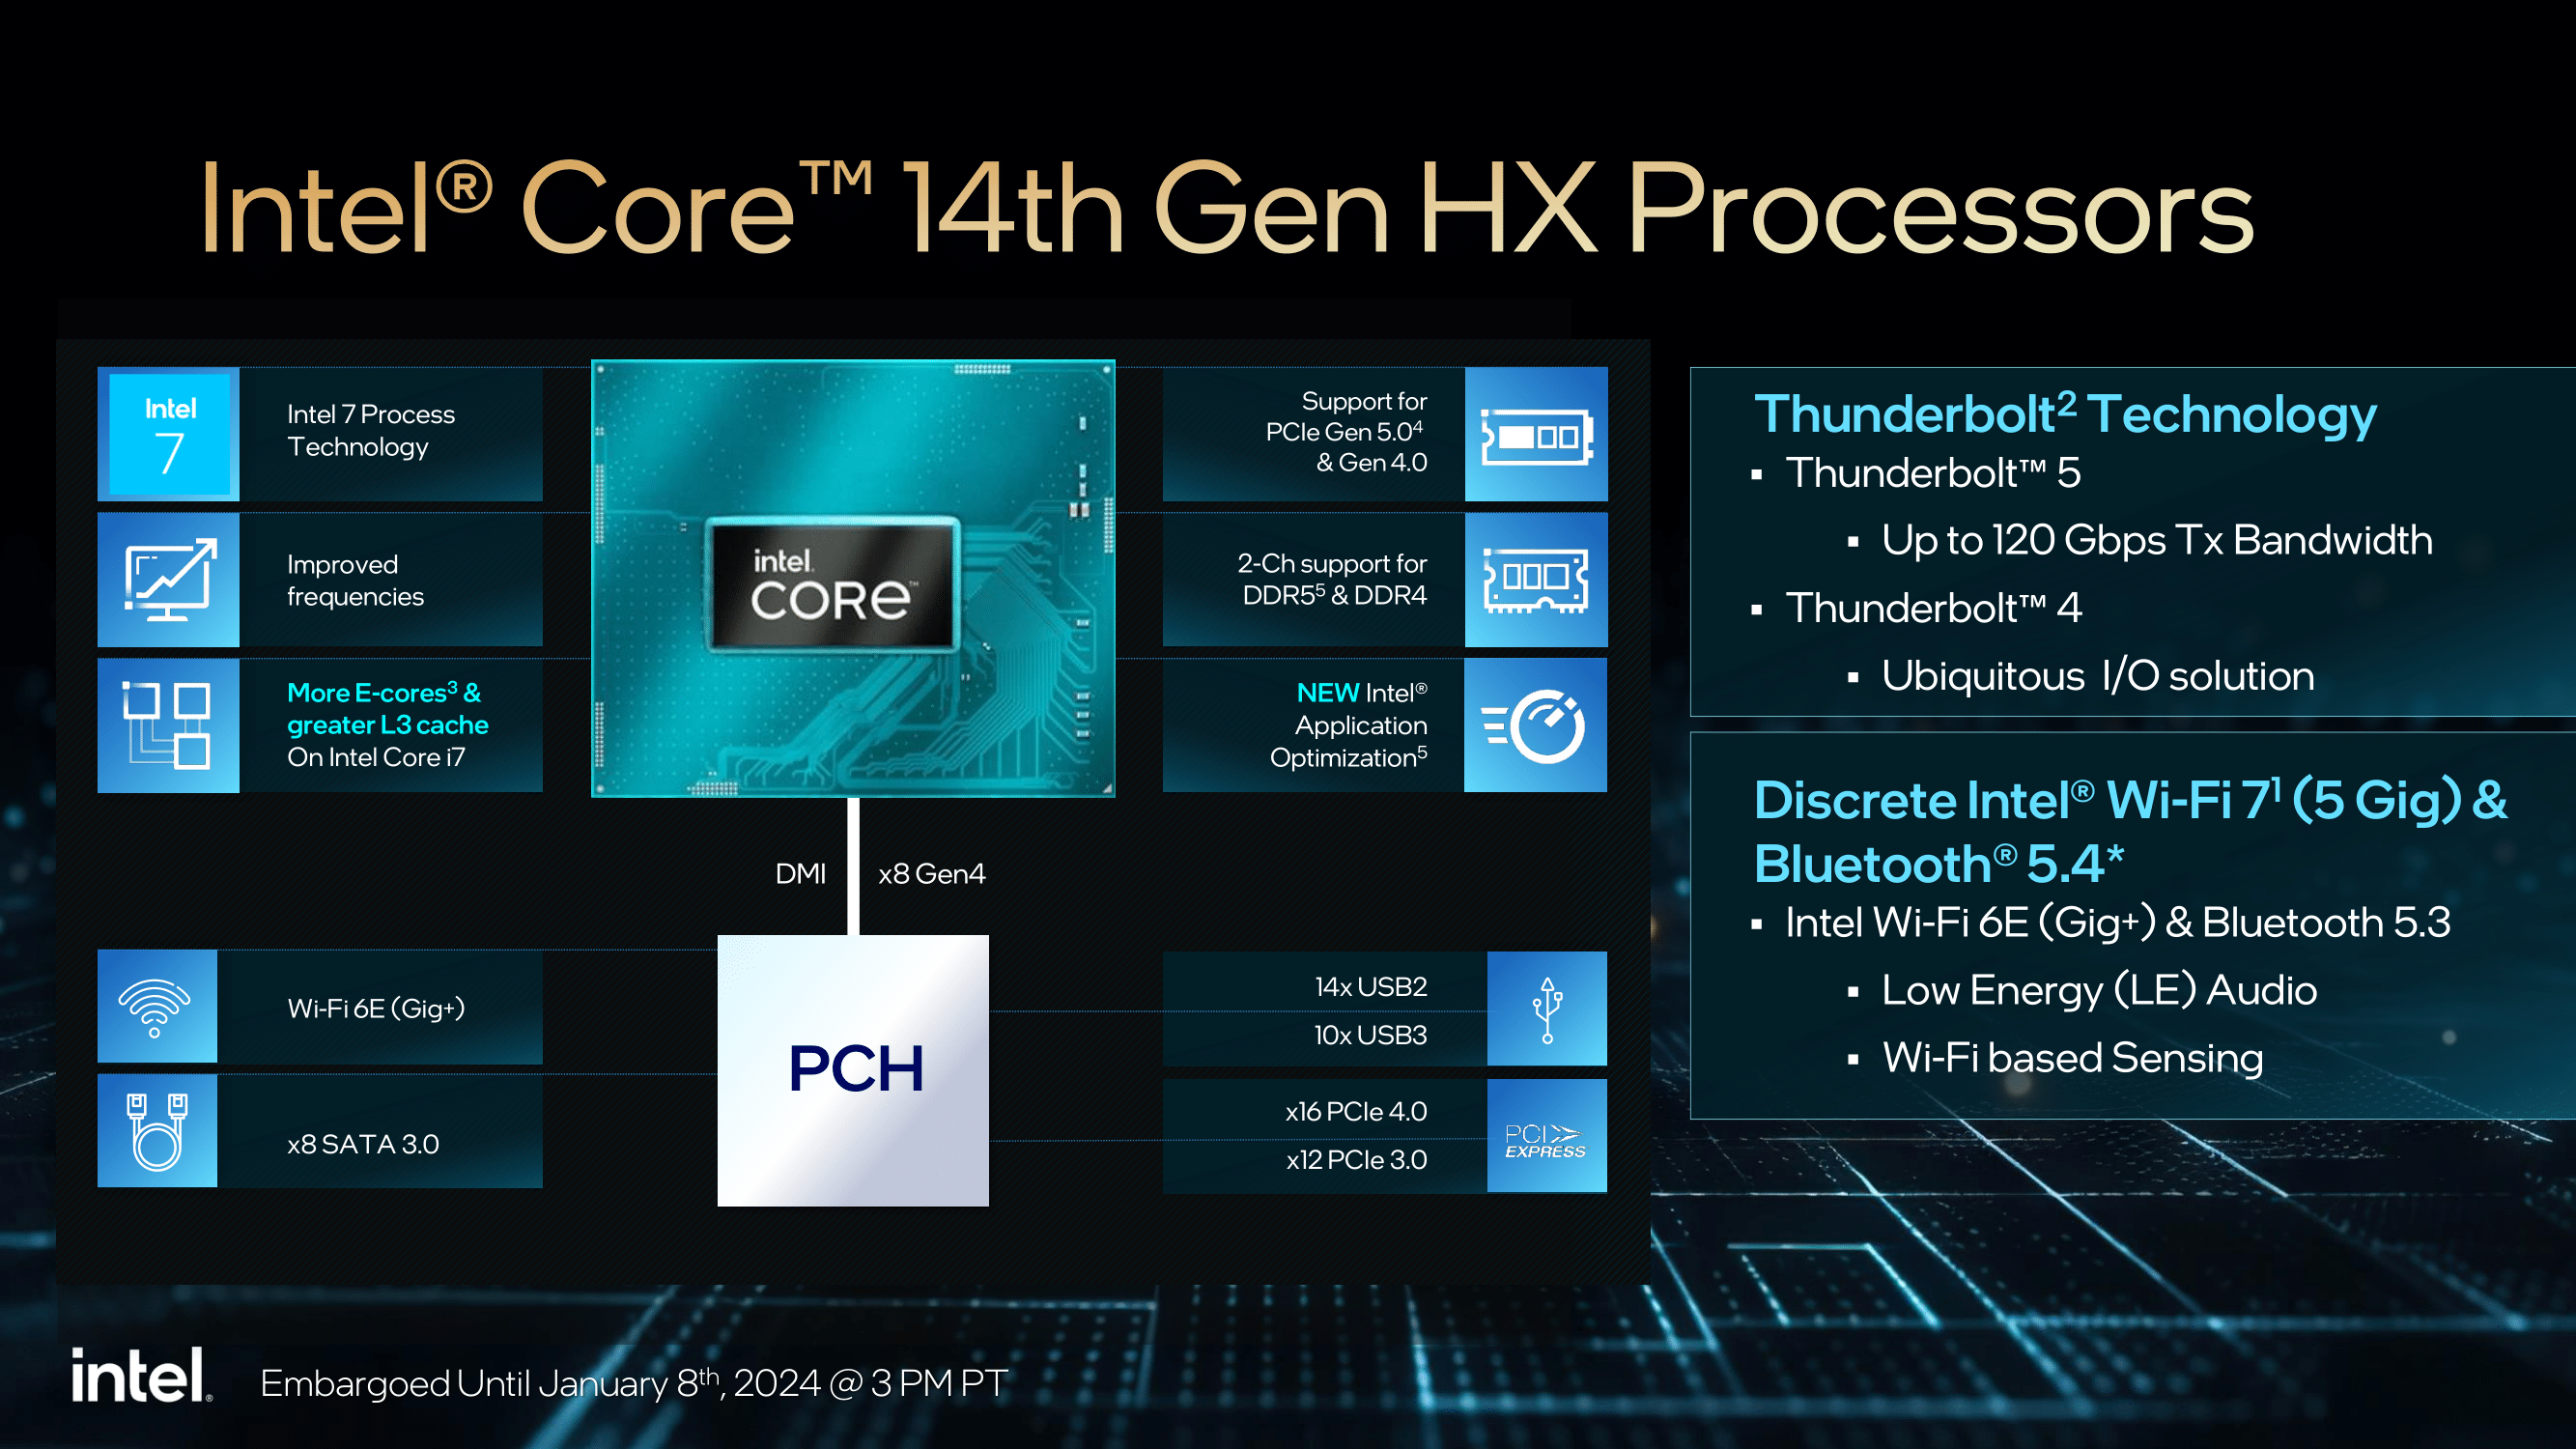 Power Draw and Cooling: Intel Core 14th Gen Processors